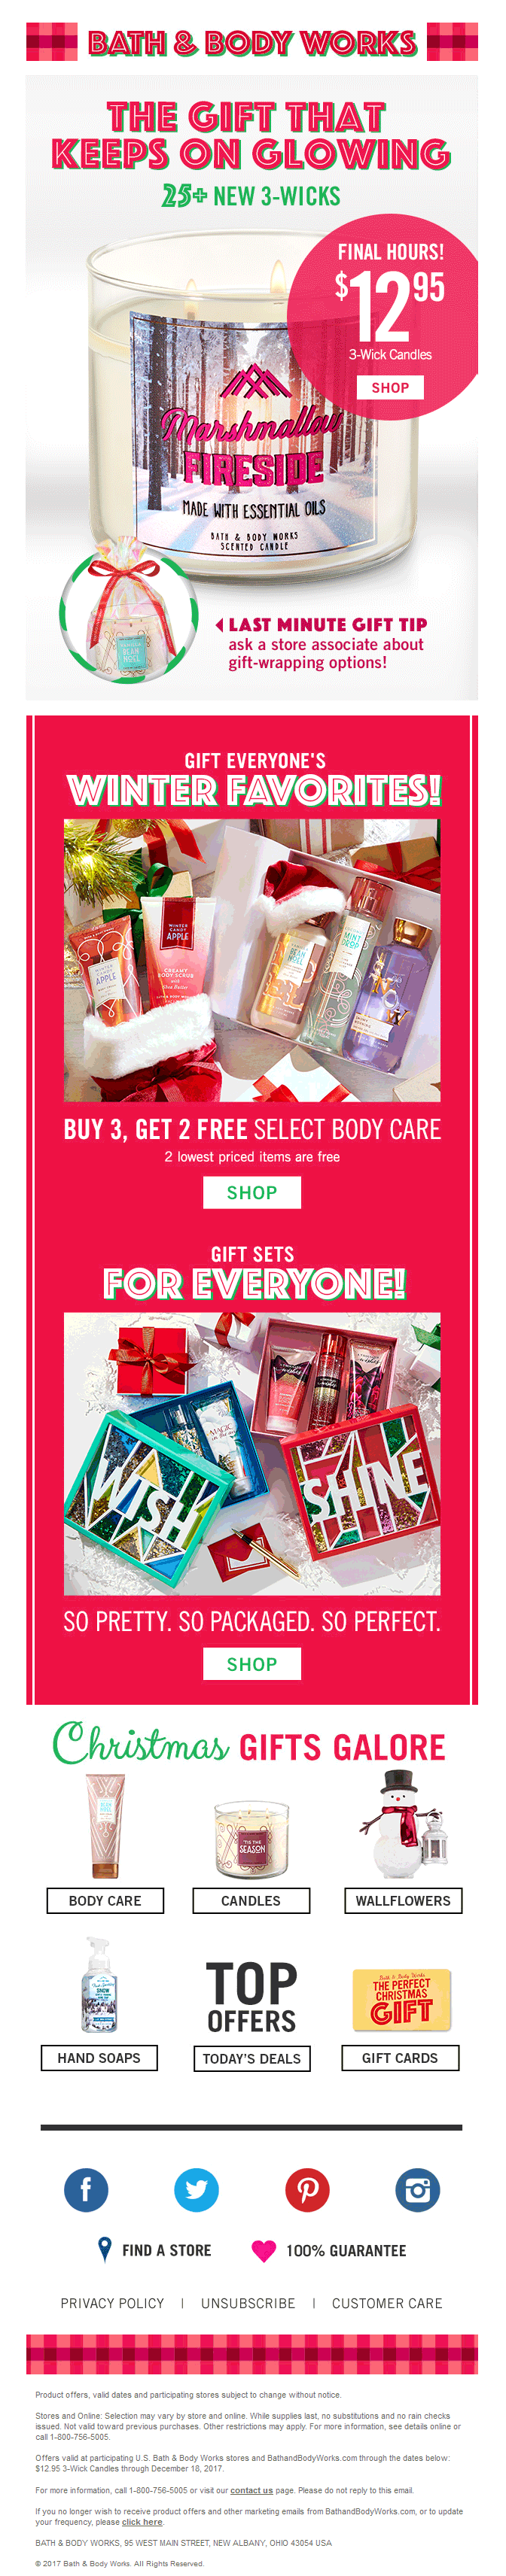 Bath and Body Works email | DeviceDaily.com